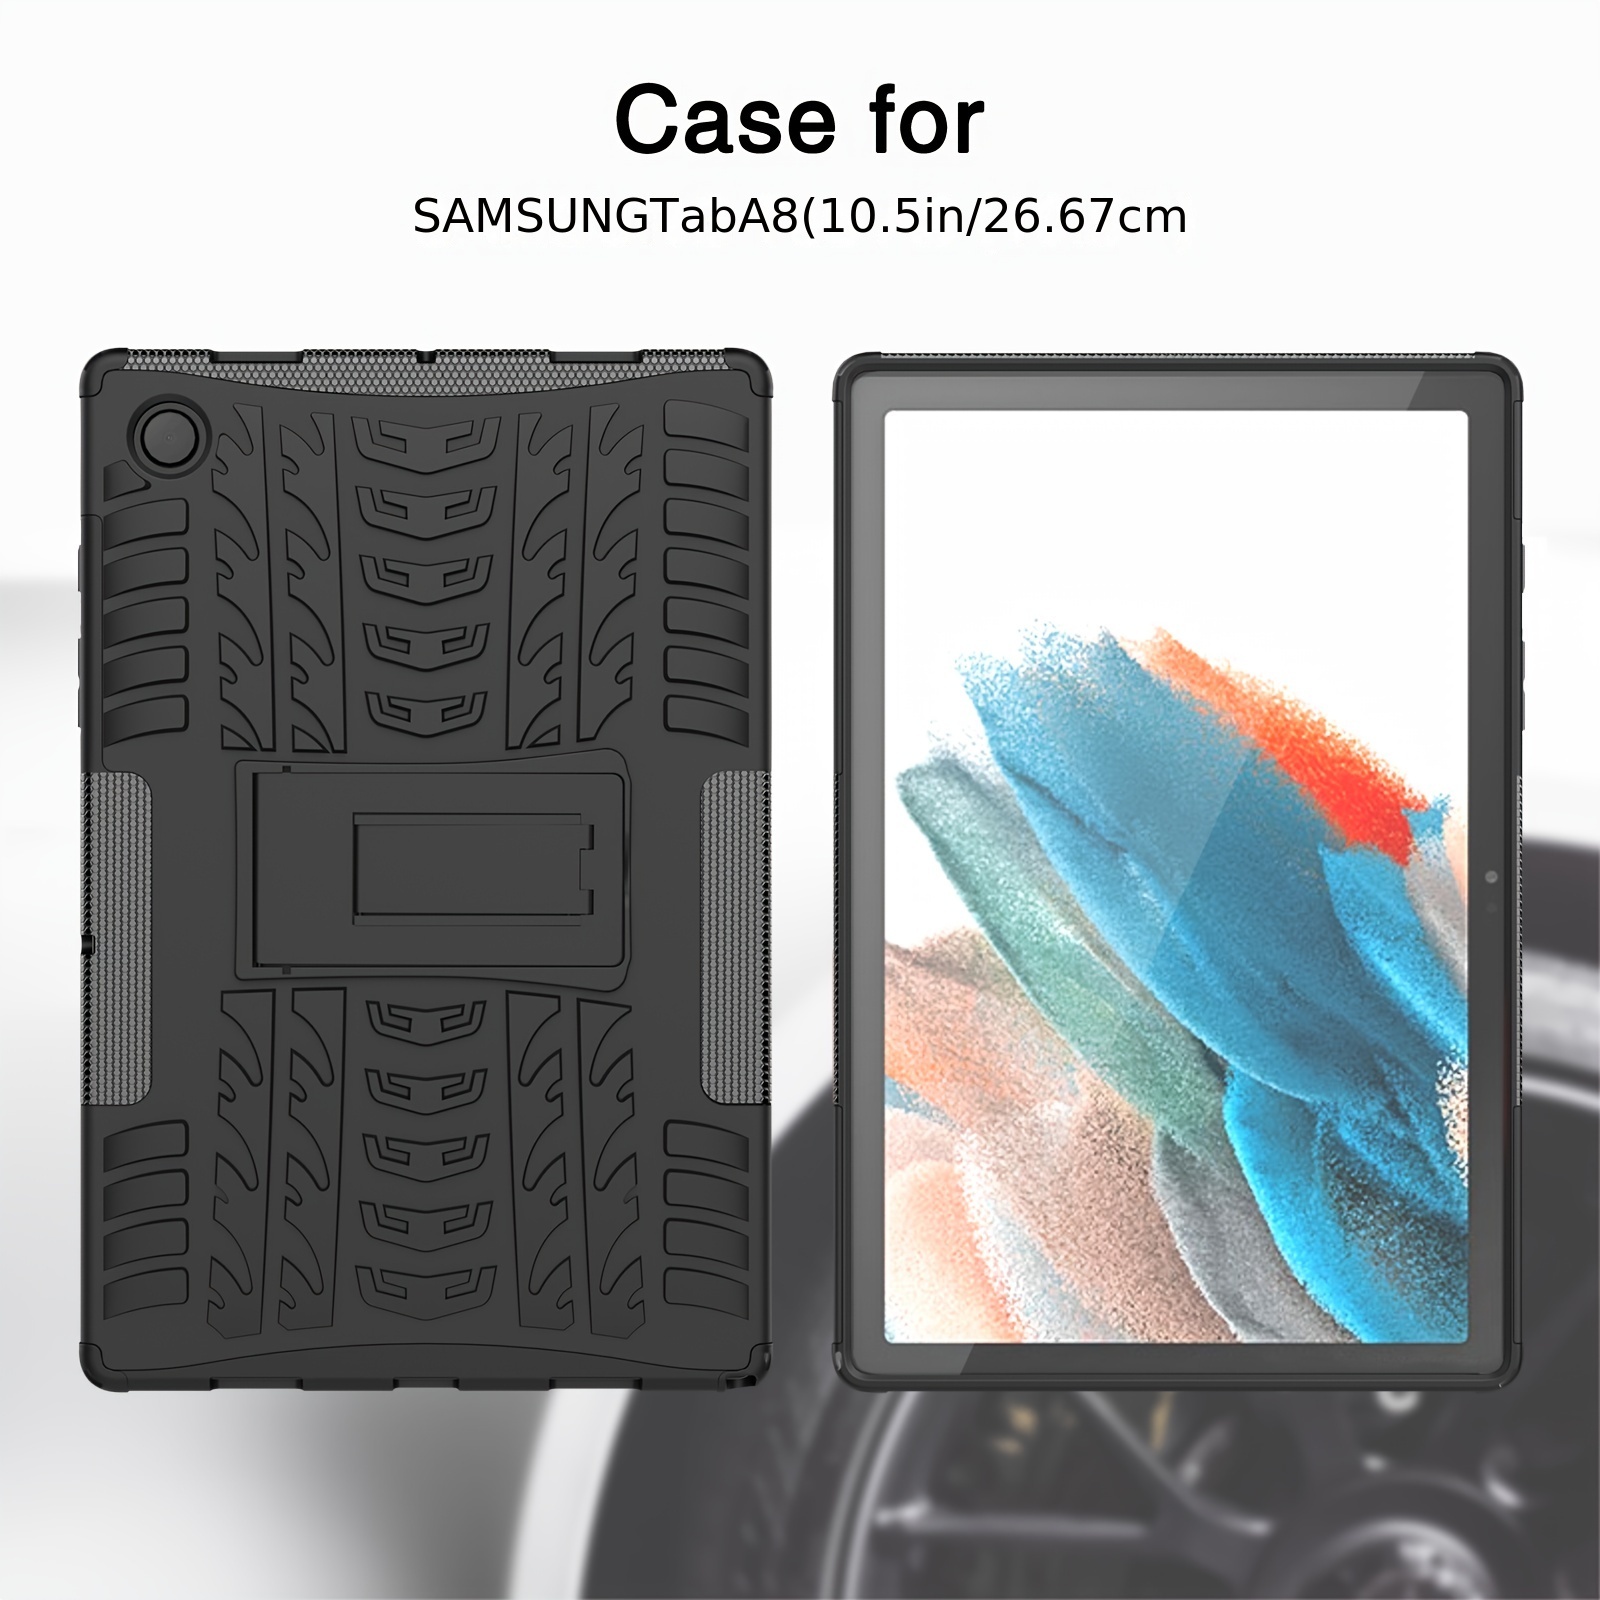 for Universal 8 7 7.9 9 Inch Android Tablet Case 360 Degree Rotating PU  Leather Stand Folio Cover for Fire HD 8/Galaxy Tab A/Tab E/Tab 4/Tab S2 8.0